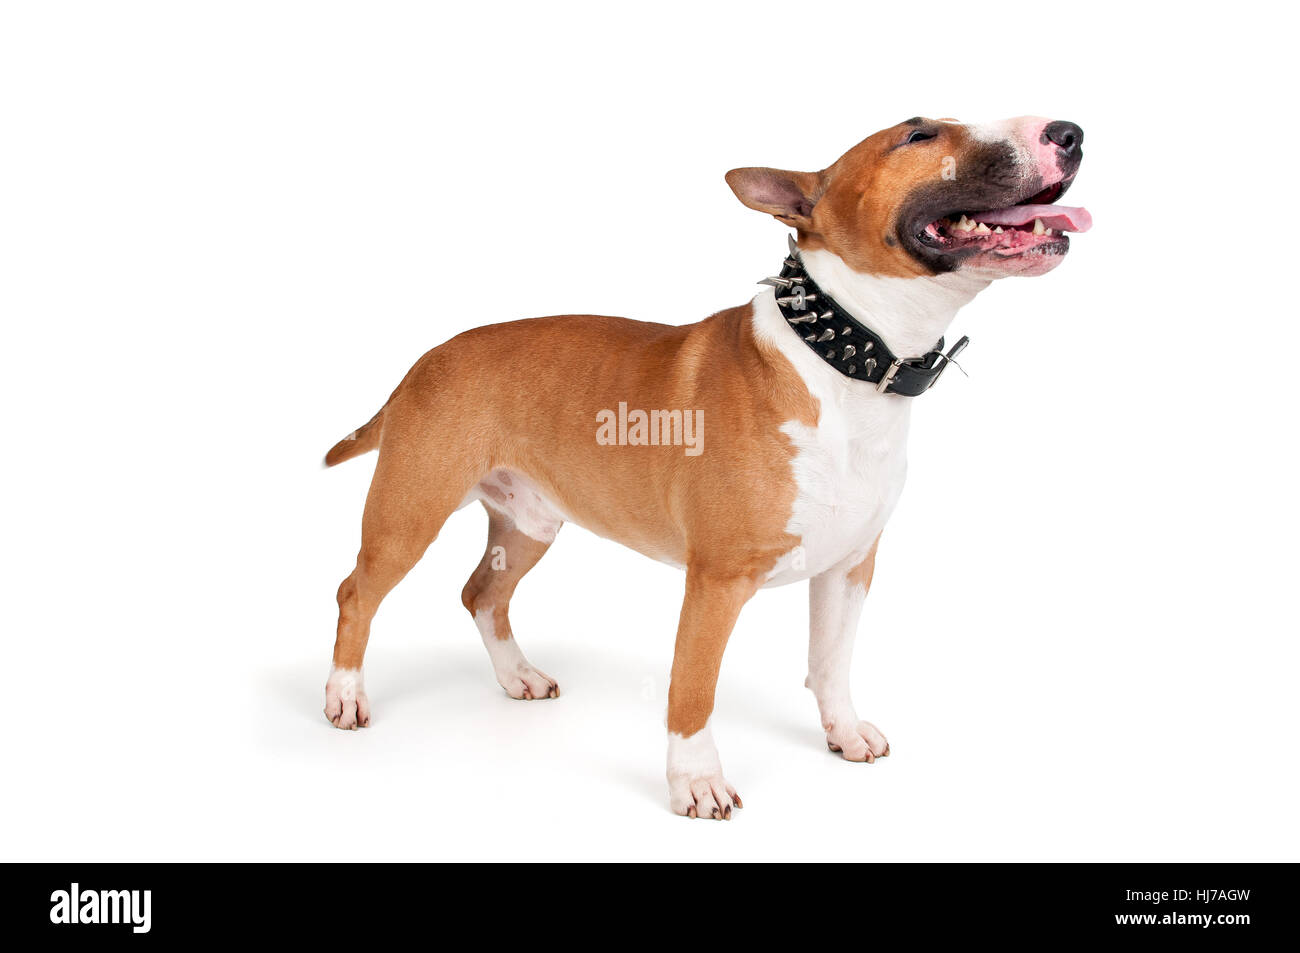 animal, pet, energy, power, electricity, electric power, dog, breed, canine, Stock Photo